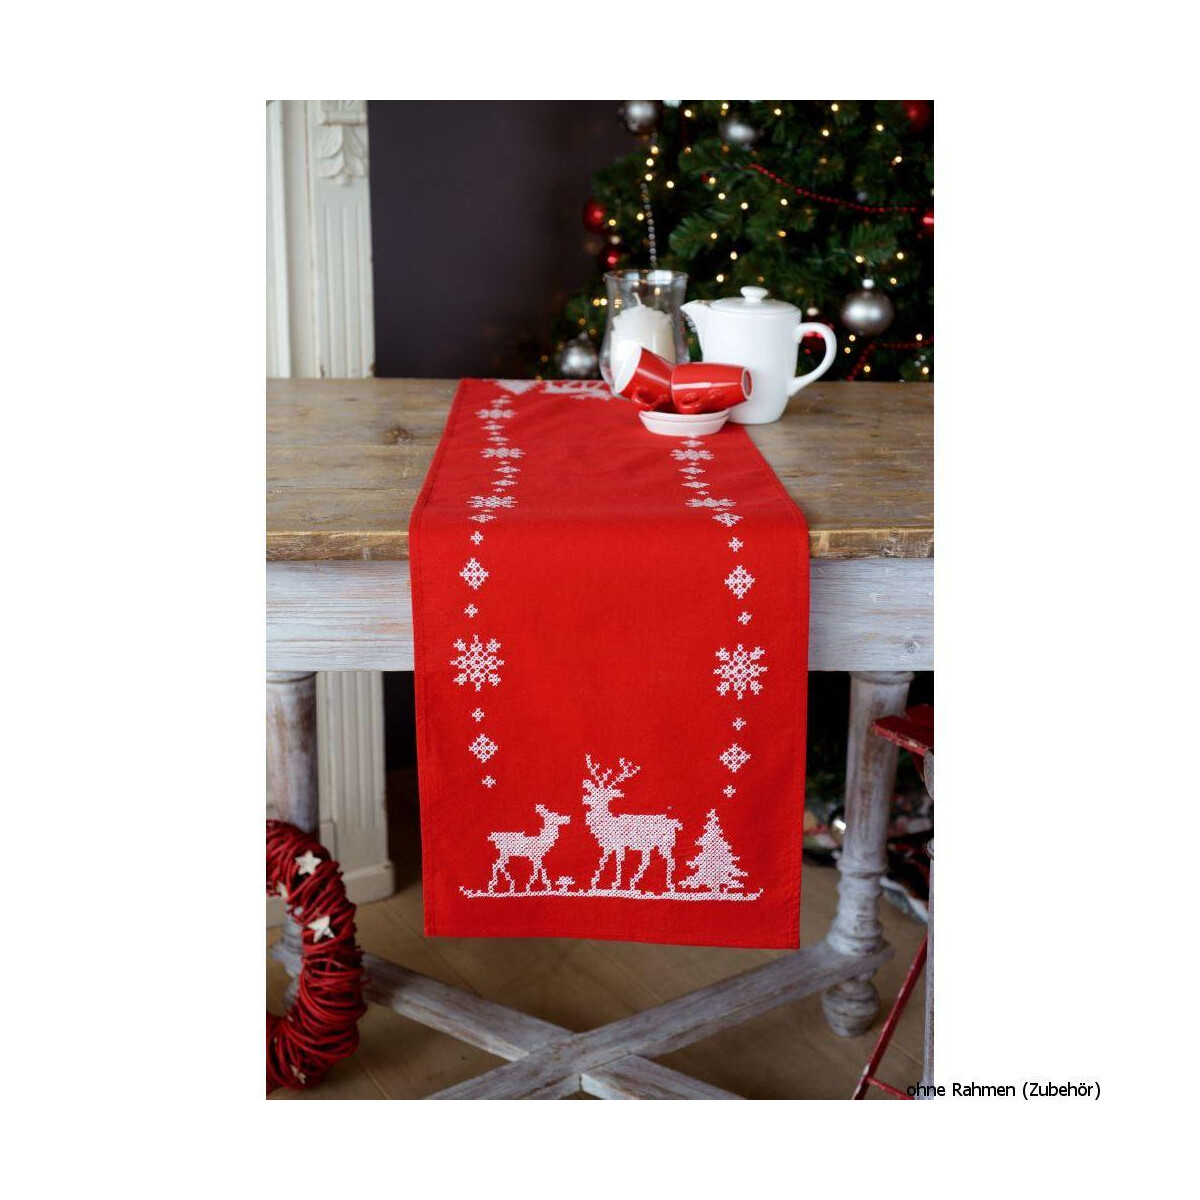 Vervaco table runner stitch embroidery kit Christmas...